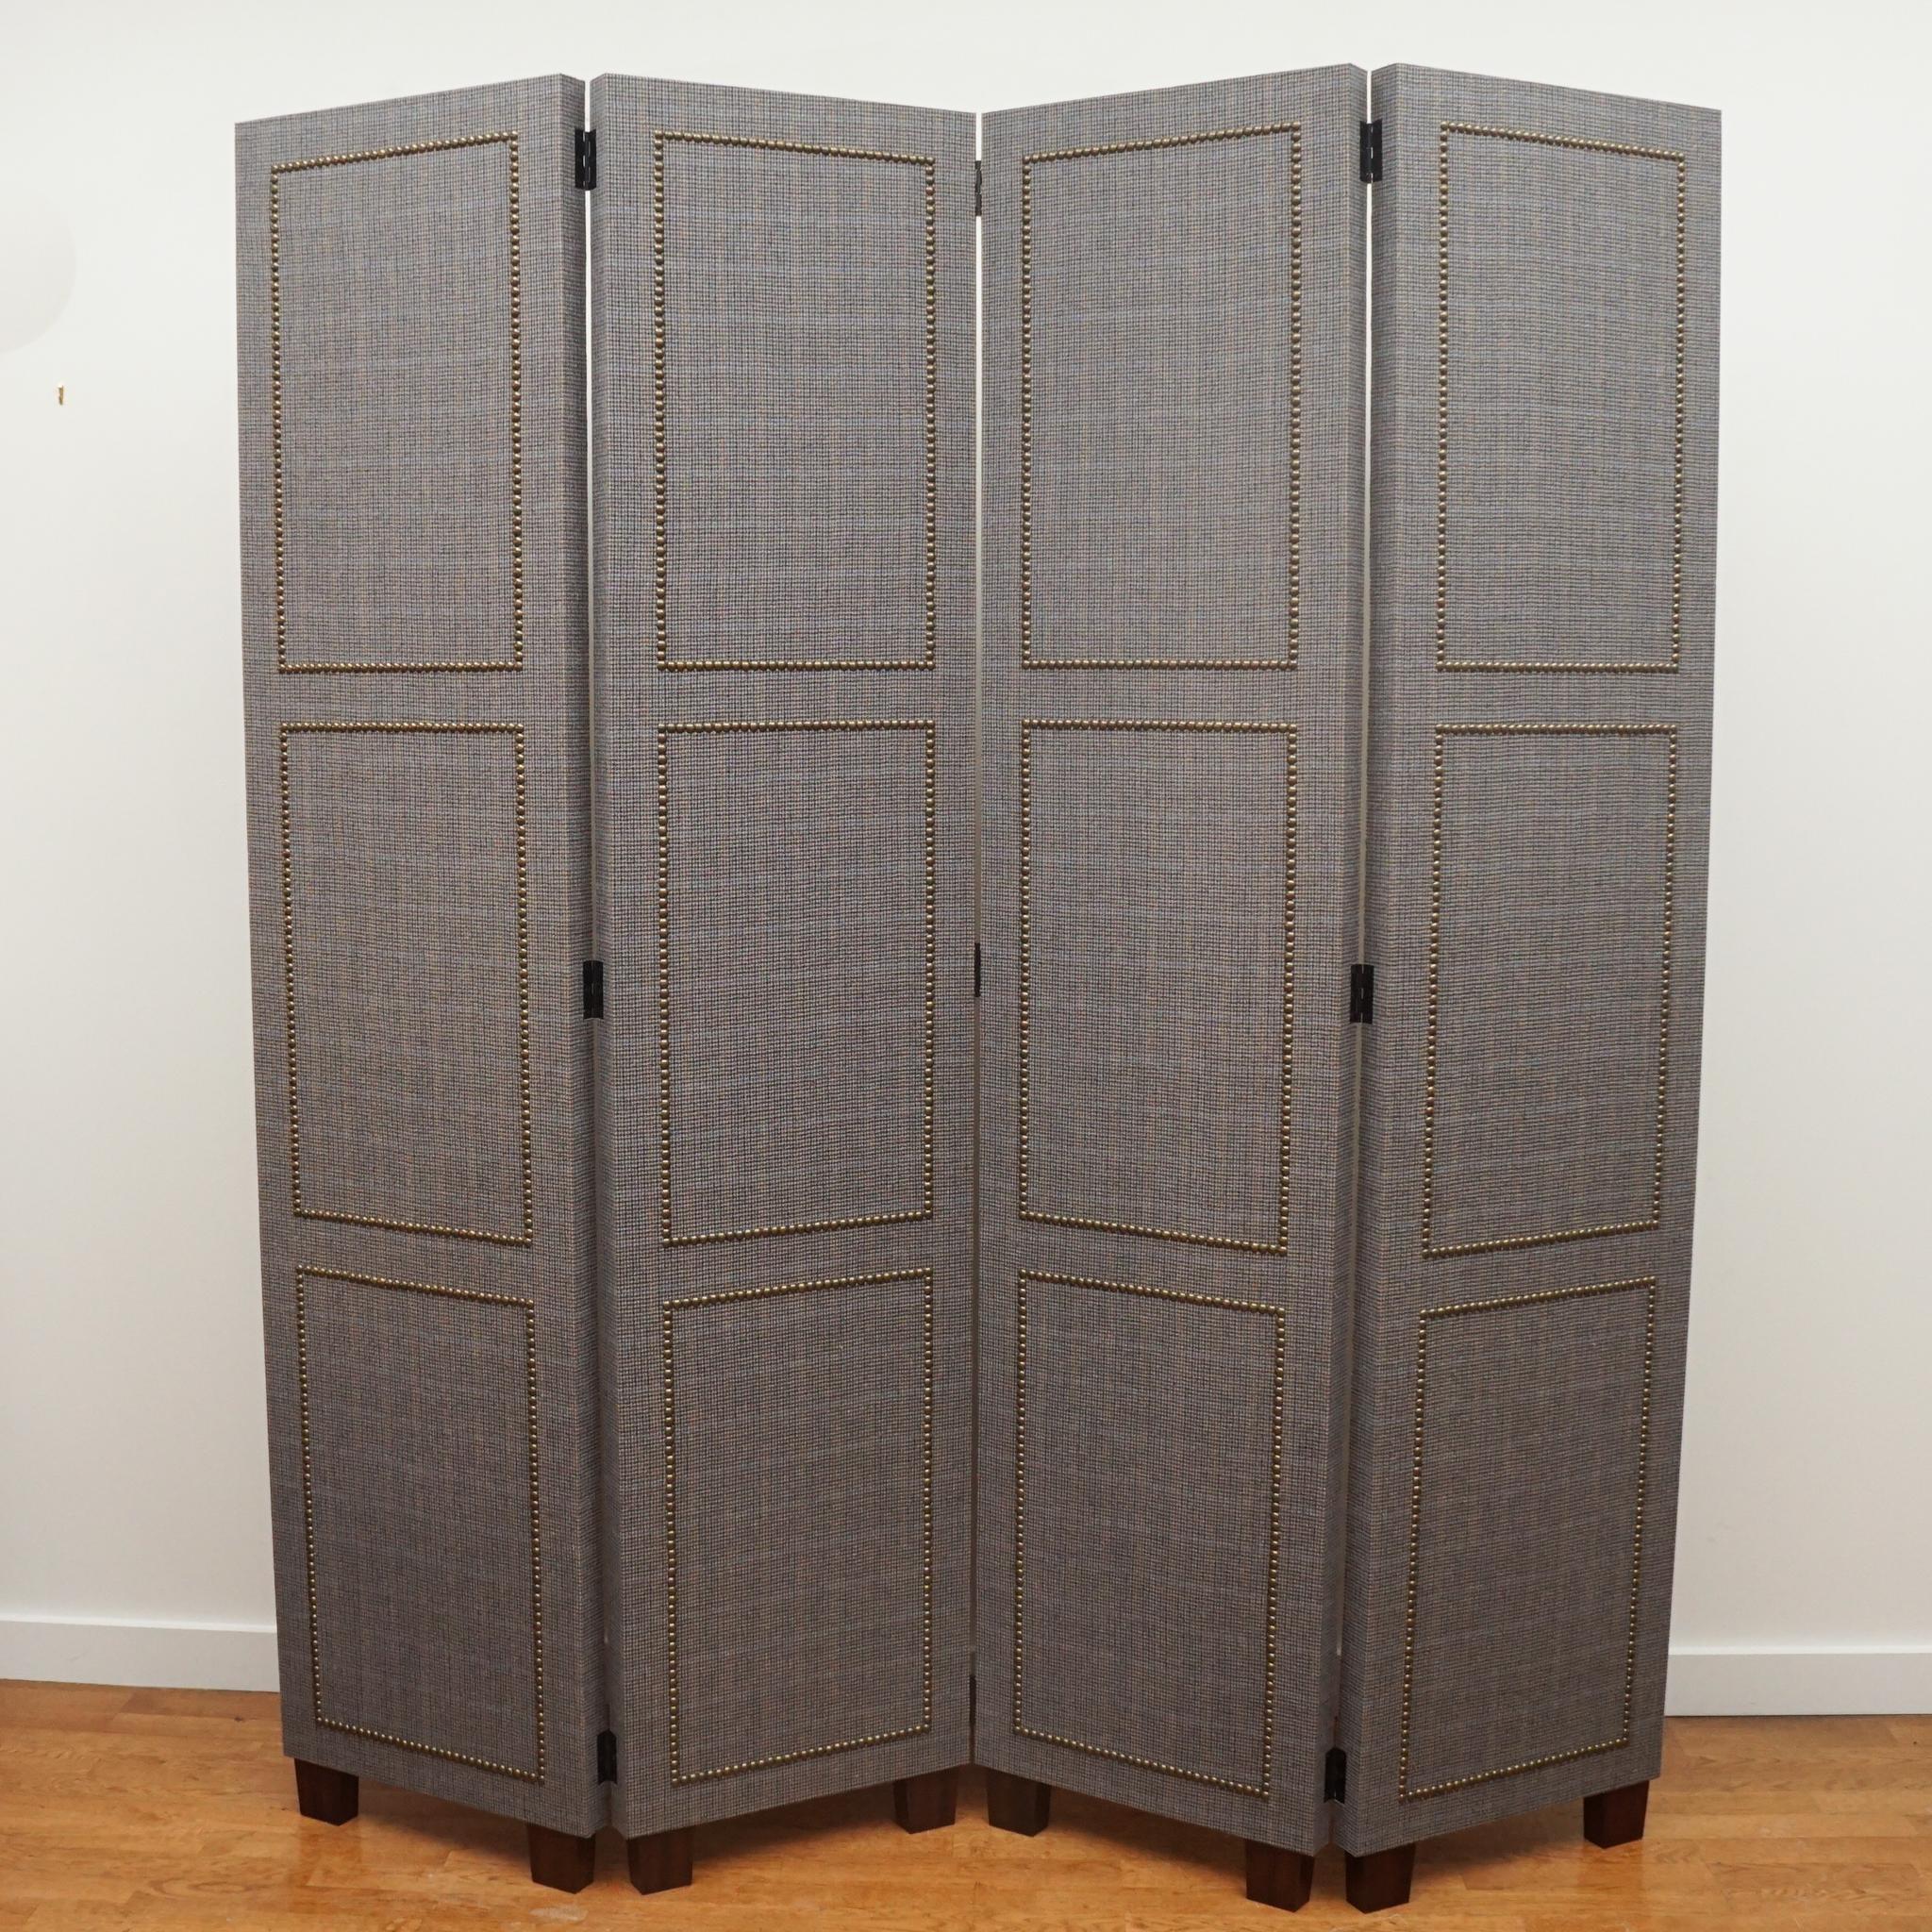 This custom-made, four-panel room divider is finished with an American Wool plaid fabric and detailed with antique brass nail heads. Each panel measures 18